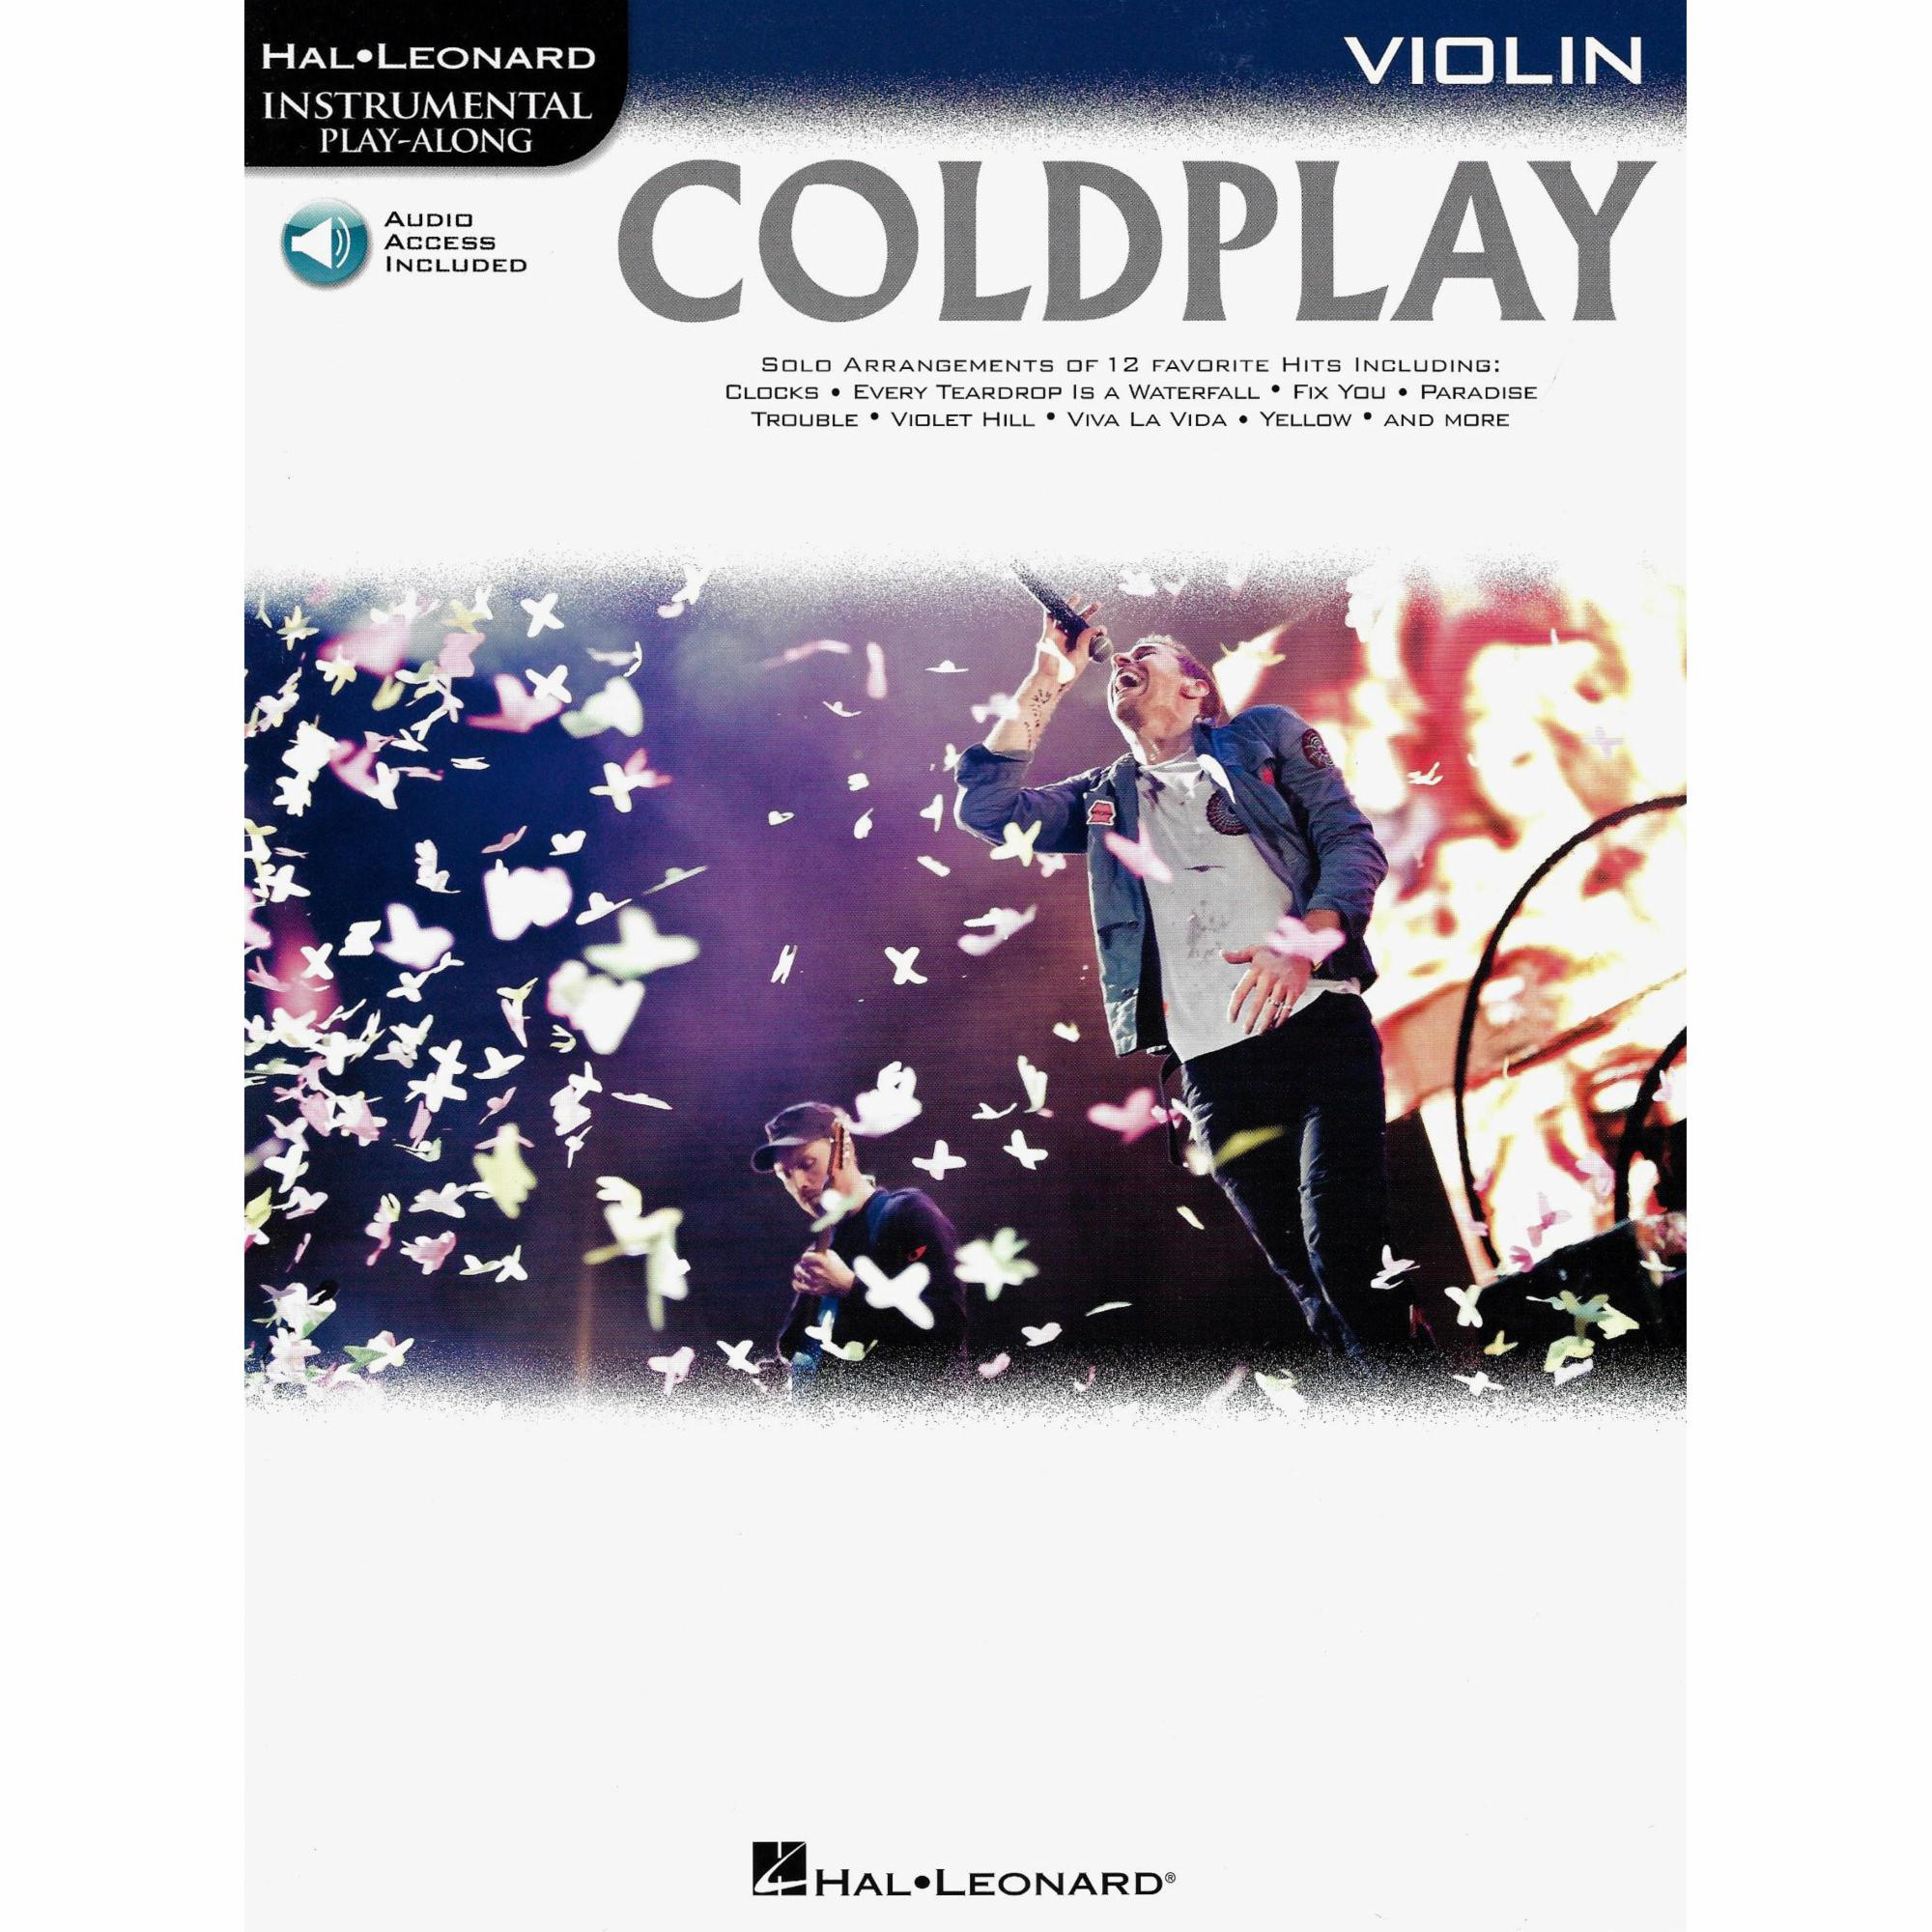 Coldplay for Violin or Cello